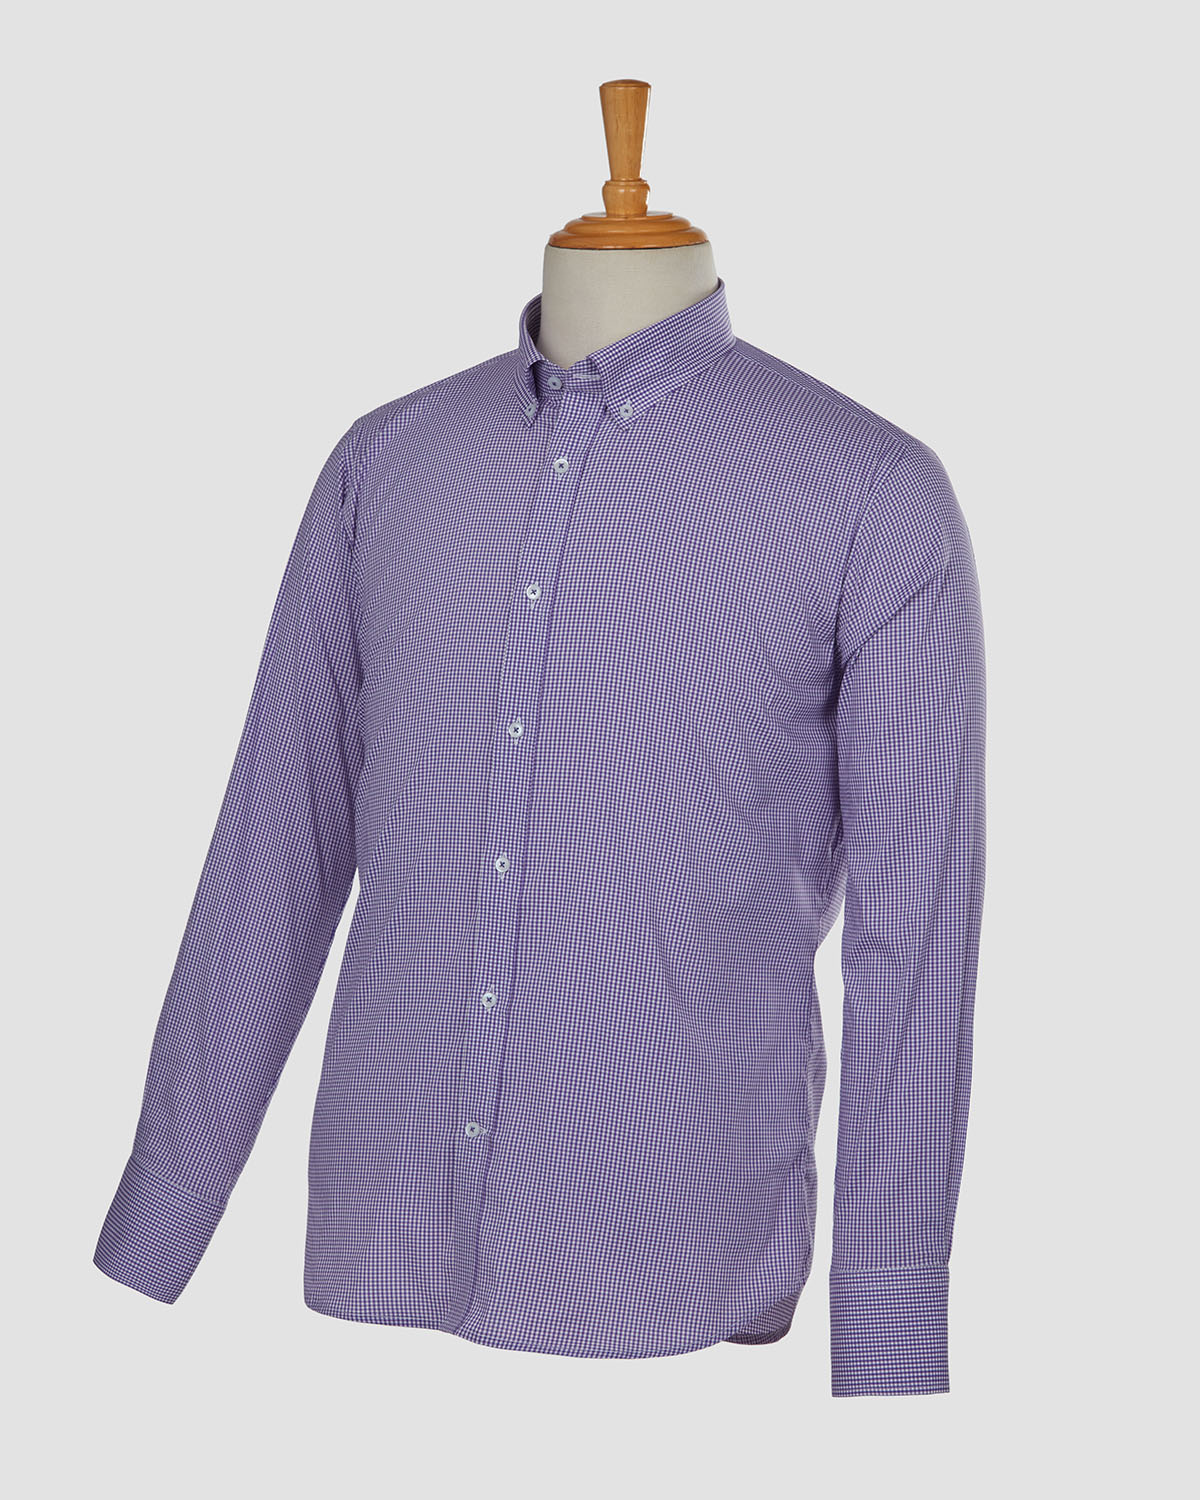 Bombay Shirt Company - Luthai Mulberry Grid Checked Shirt